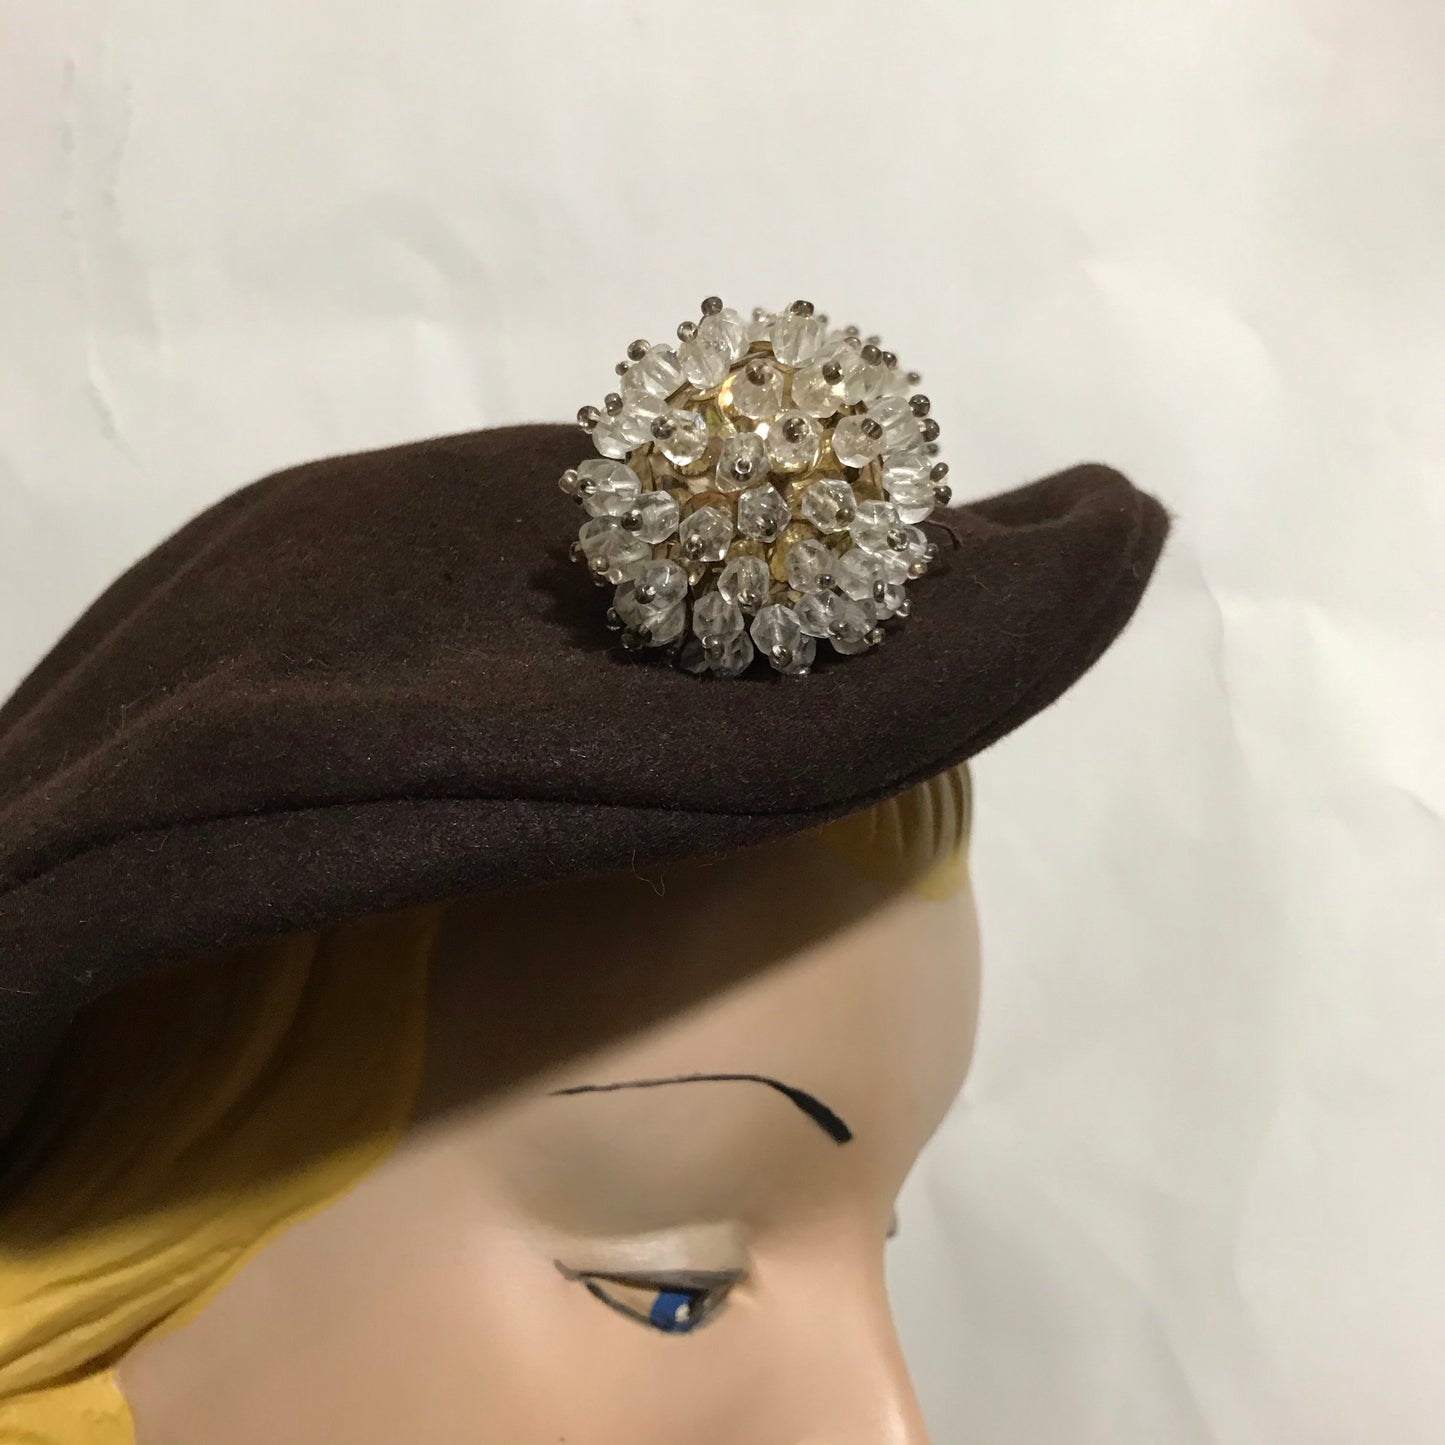 Crystal Spiked Ball Adorned Cocoa Felted Wool Sculpted Asymetrical Hat circa 1930s